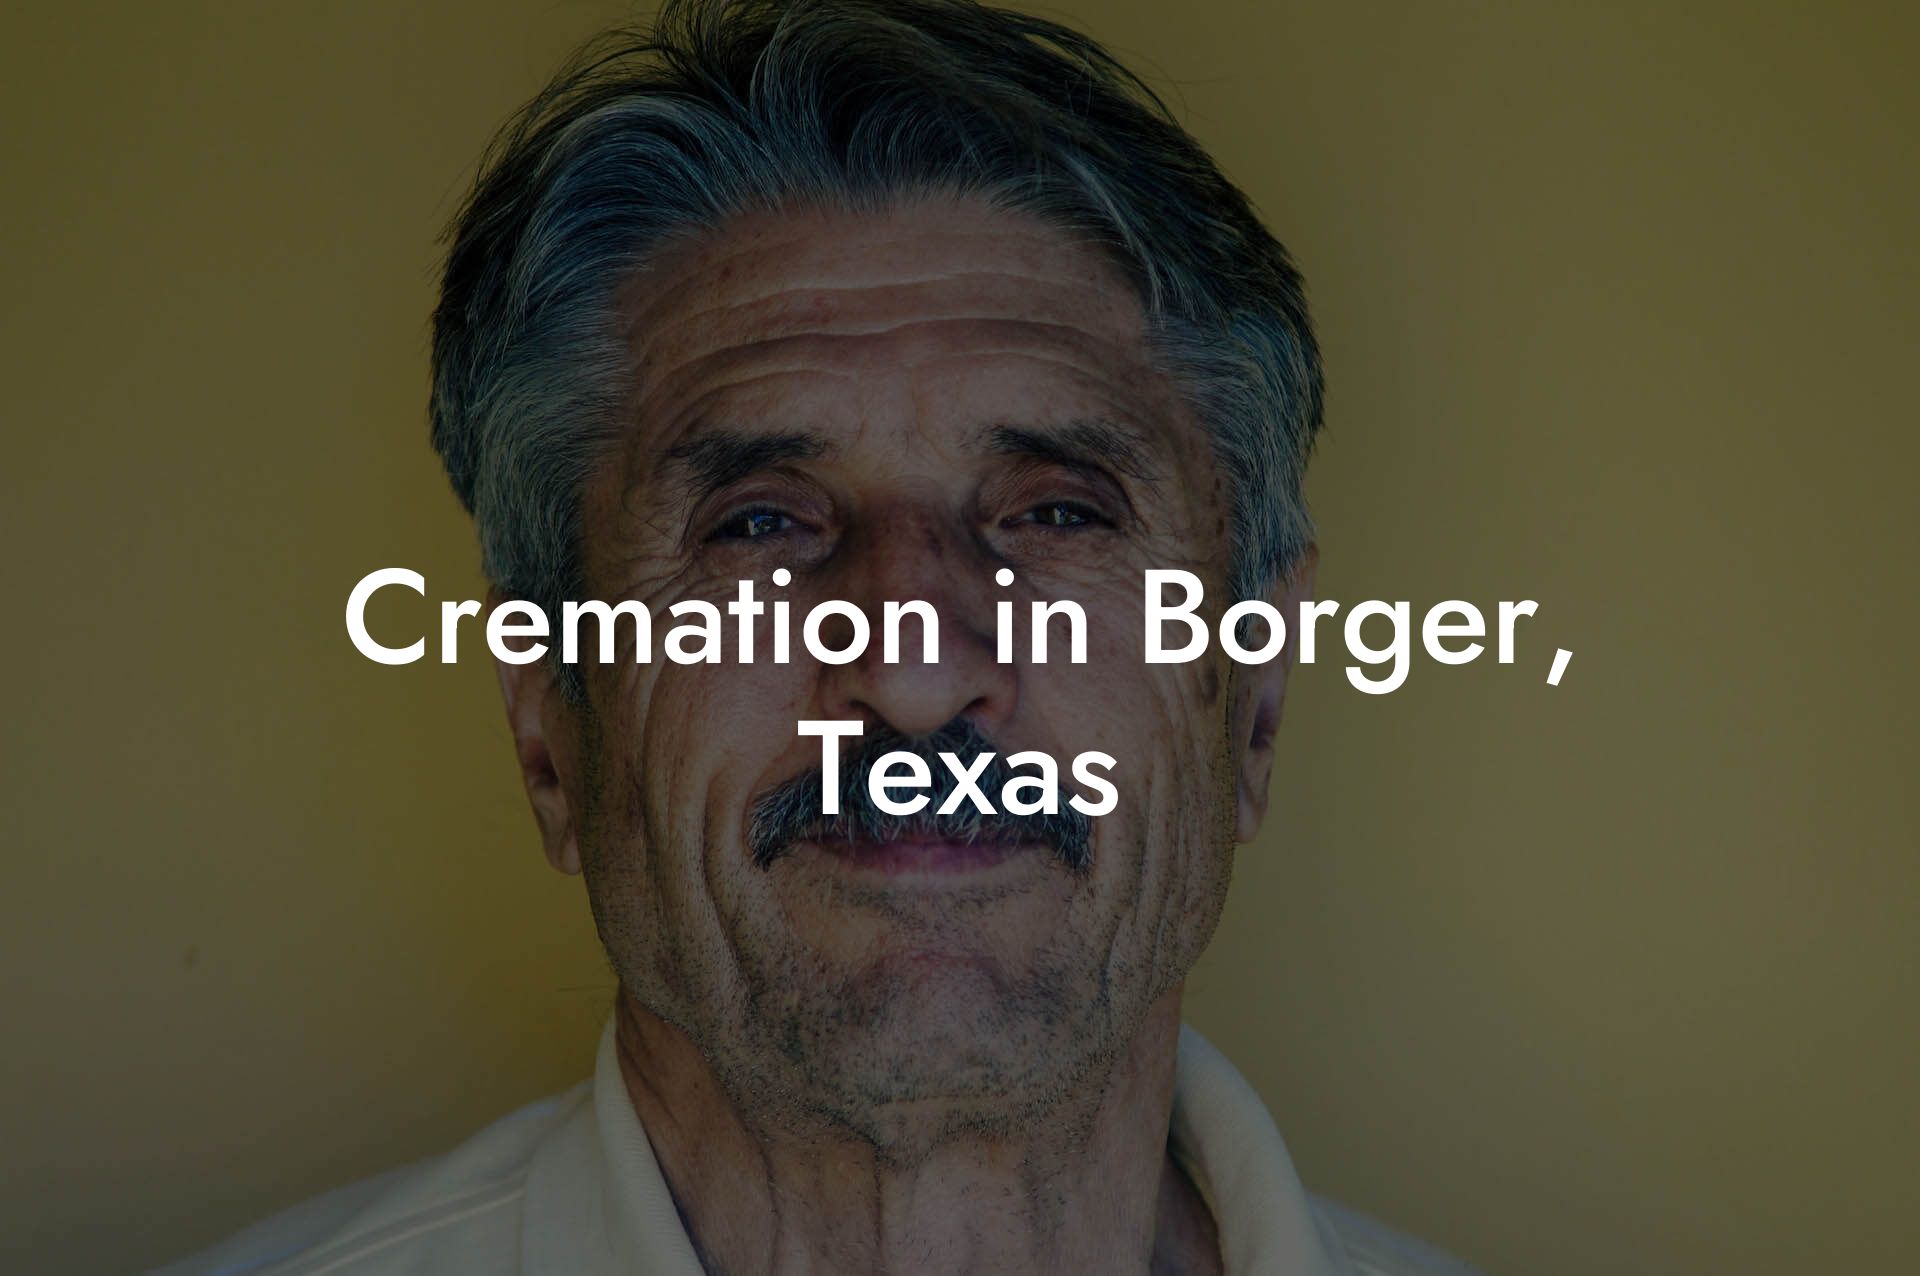 Cremation in Borger, Texas